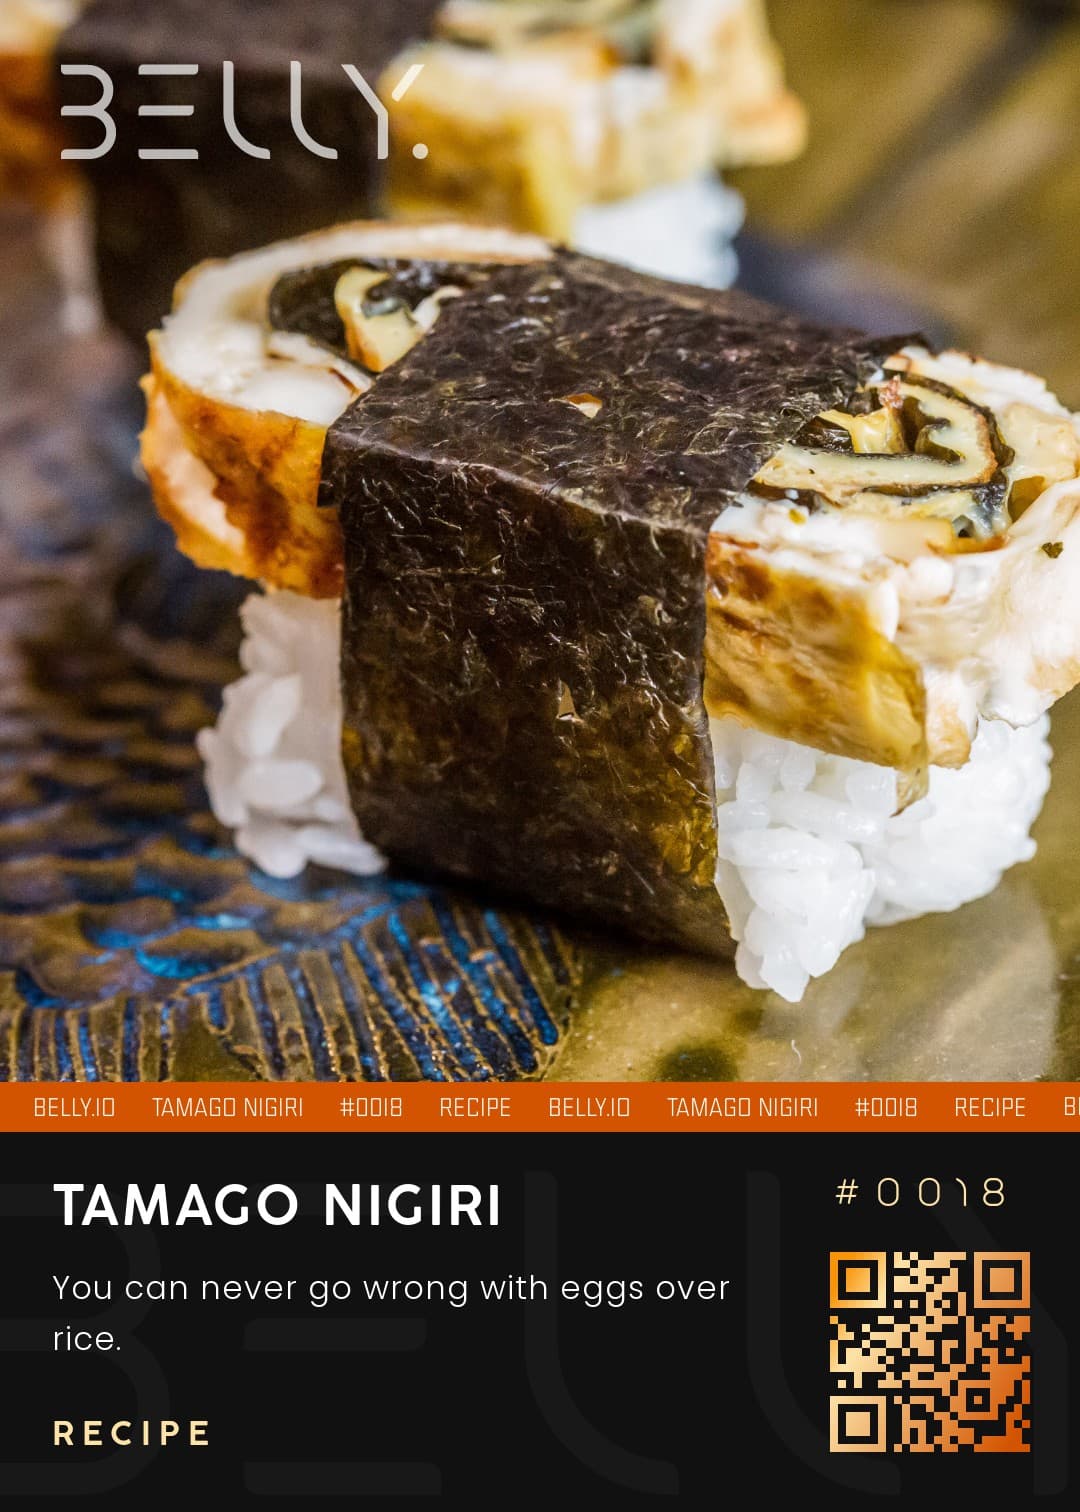 Tamago Nigiri - You can never go wrong with eggs over rice.